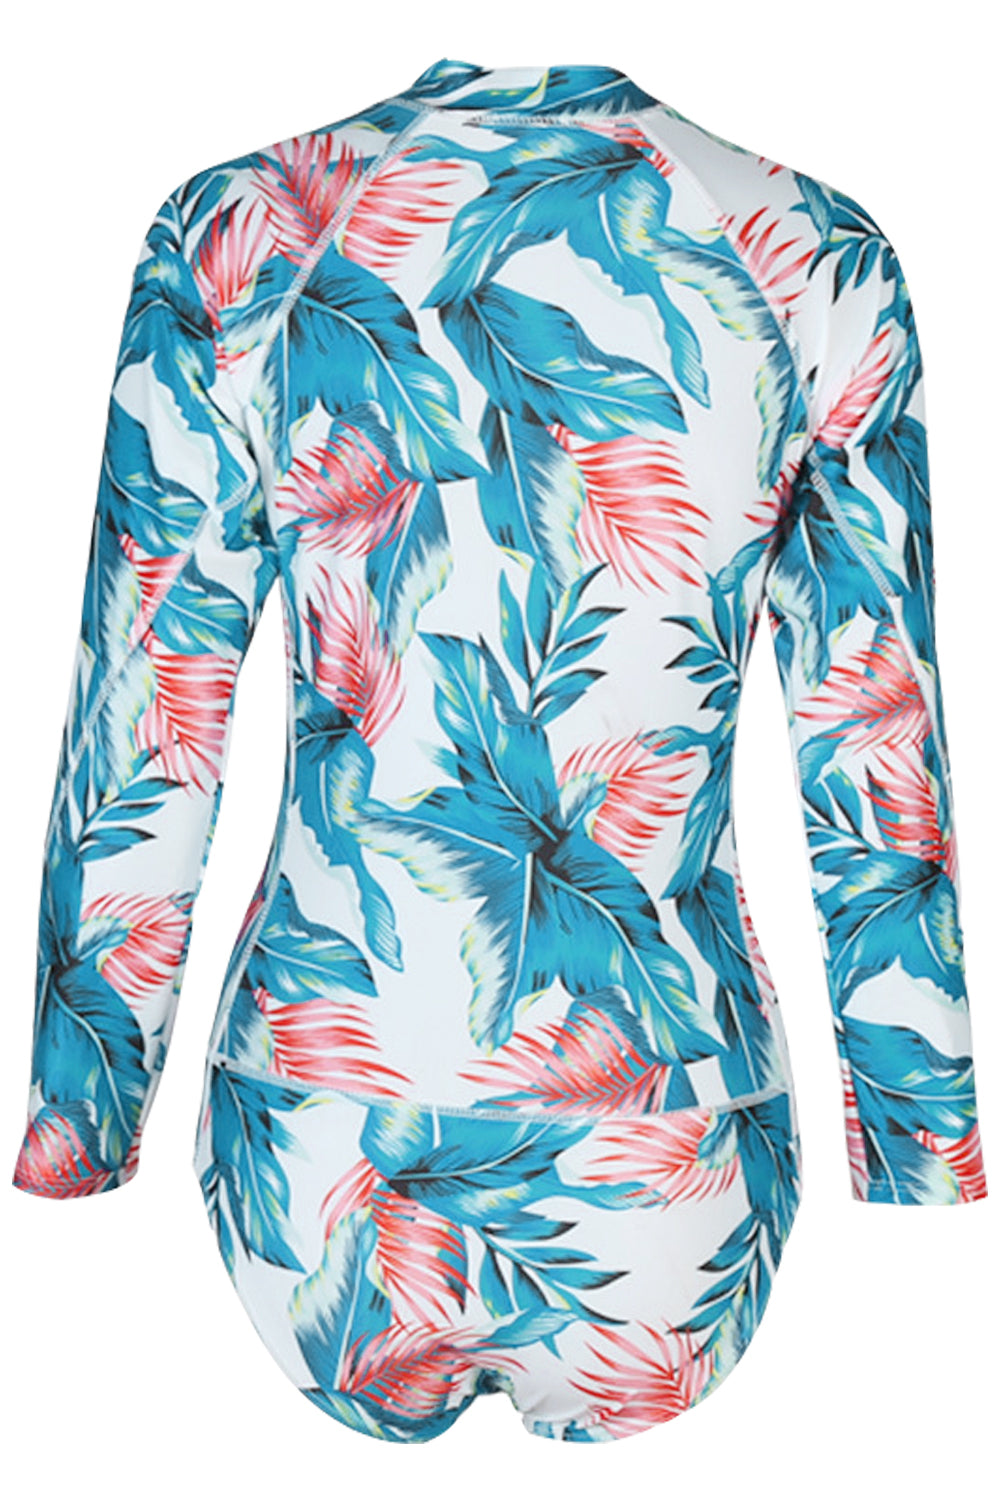 Iyasson Tropical Floral Printing Long-sleeves One-piece Swimsuit